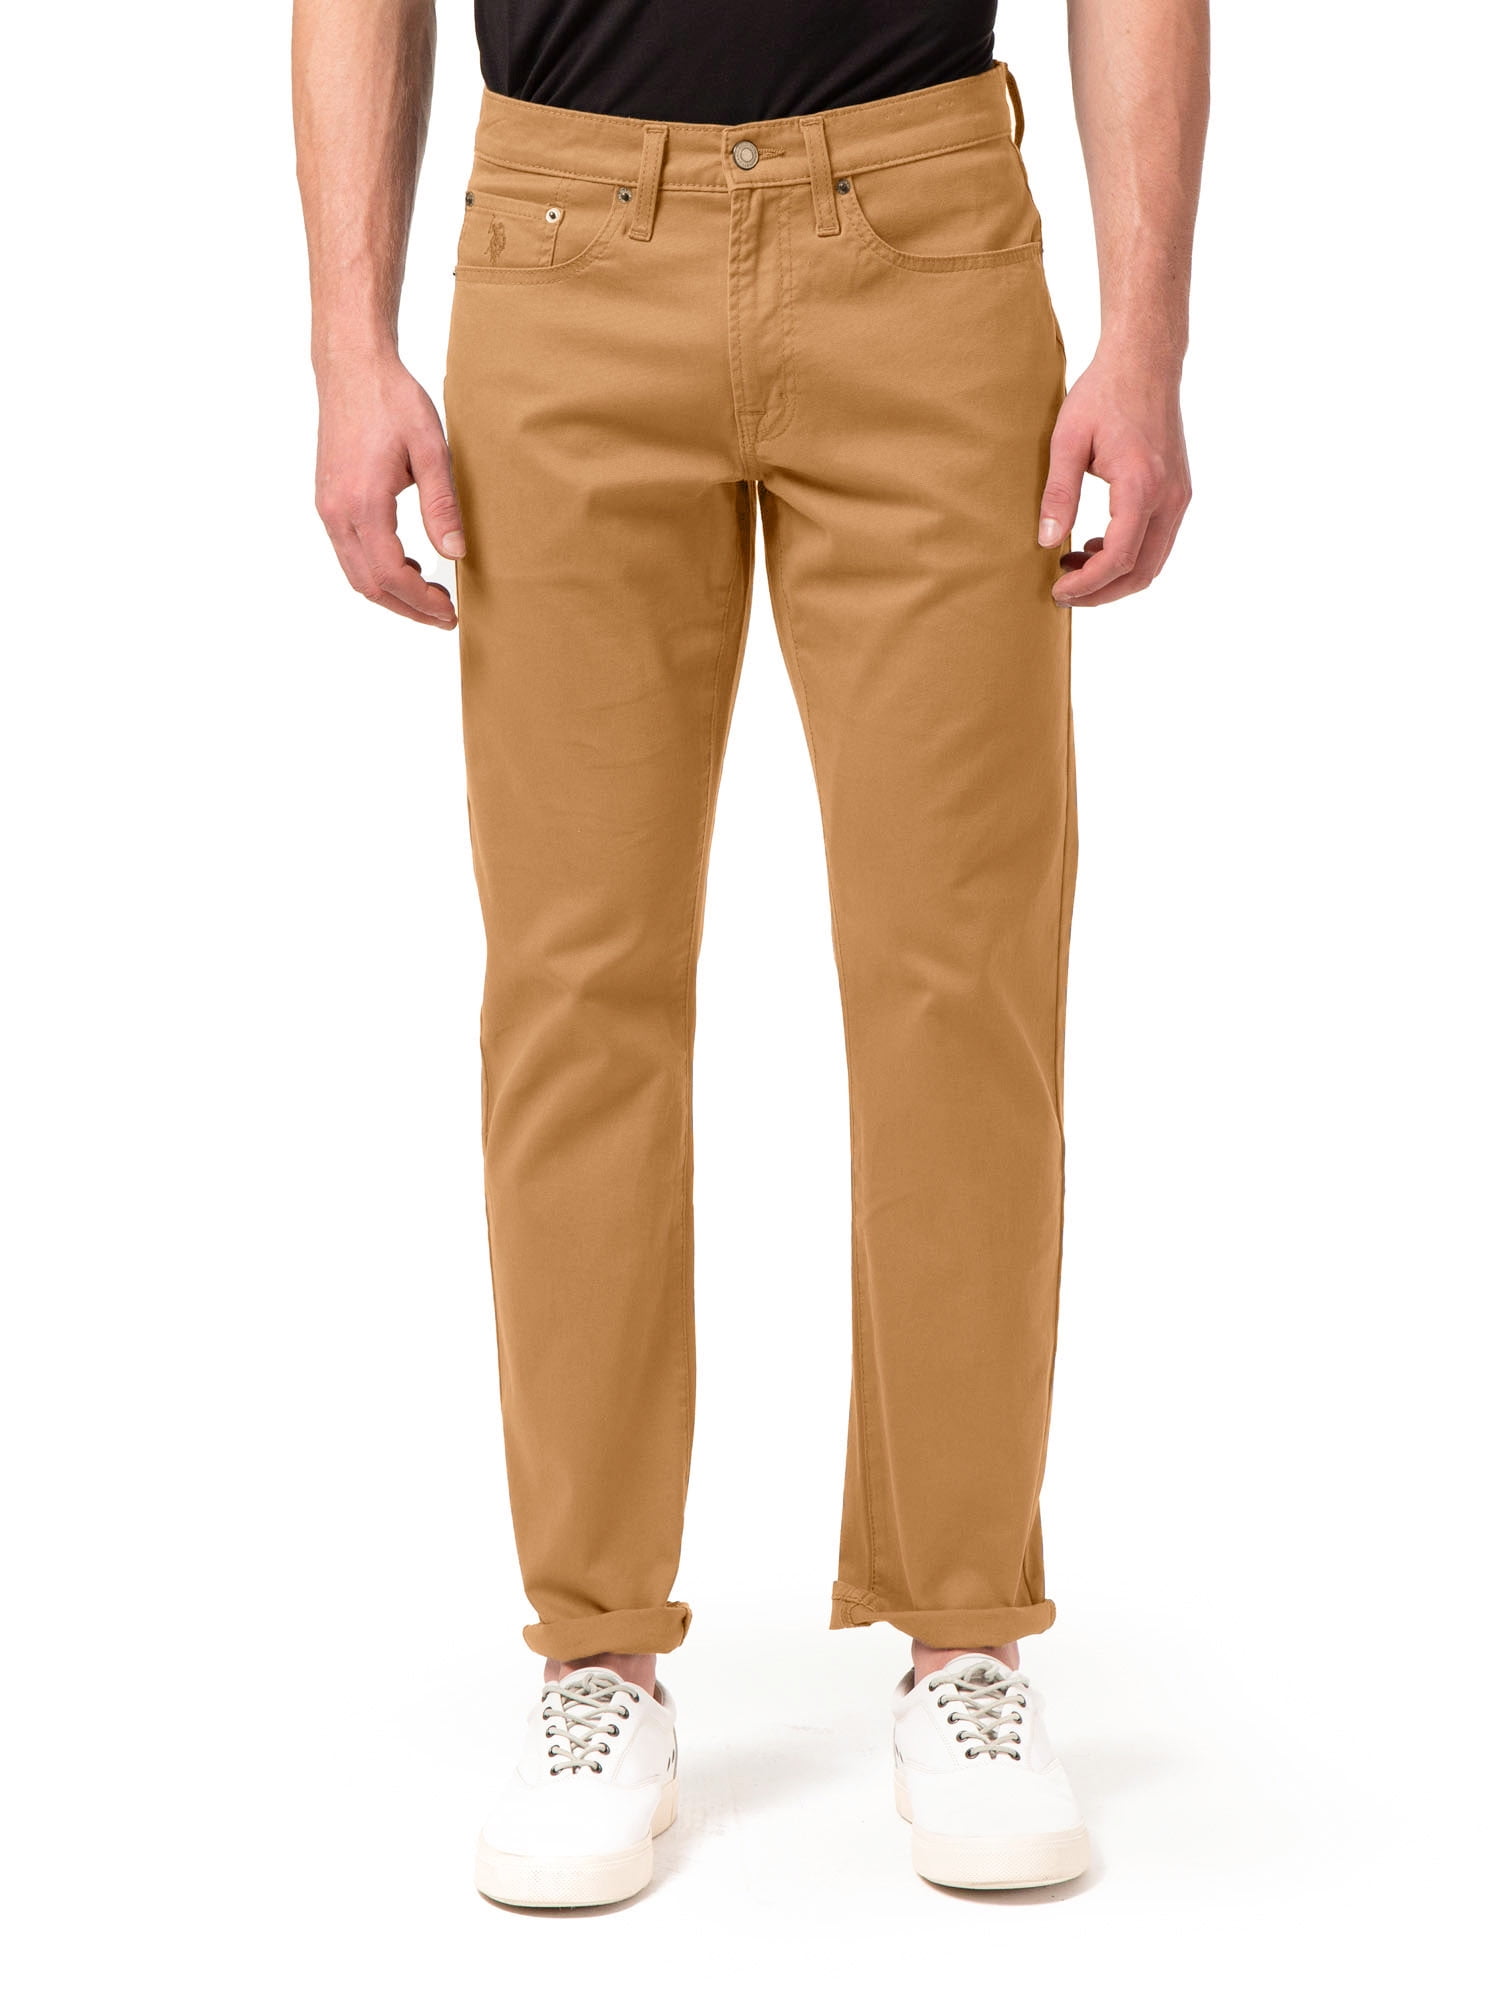 Buy Cream Trousers & Pants for Men by Nation Polo Club Online | Ajio.com